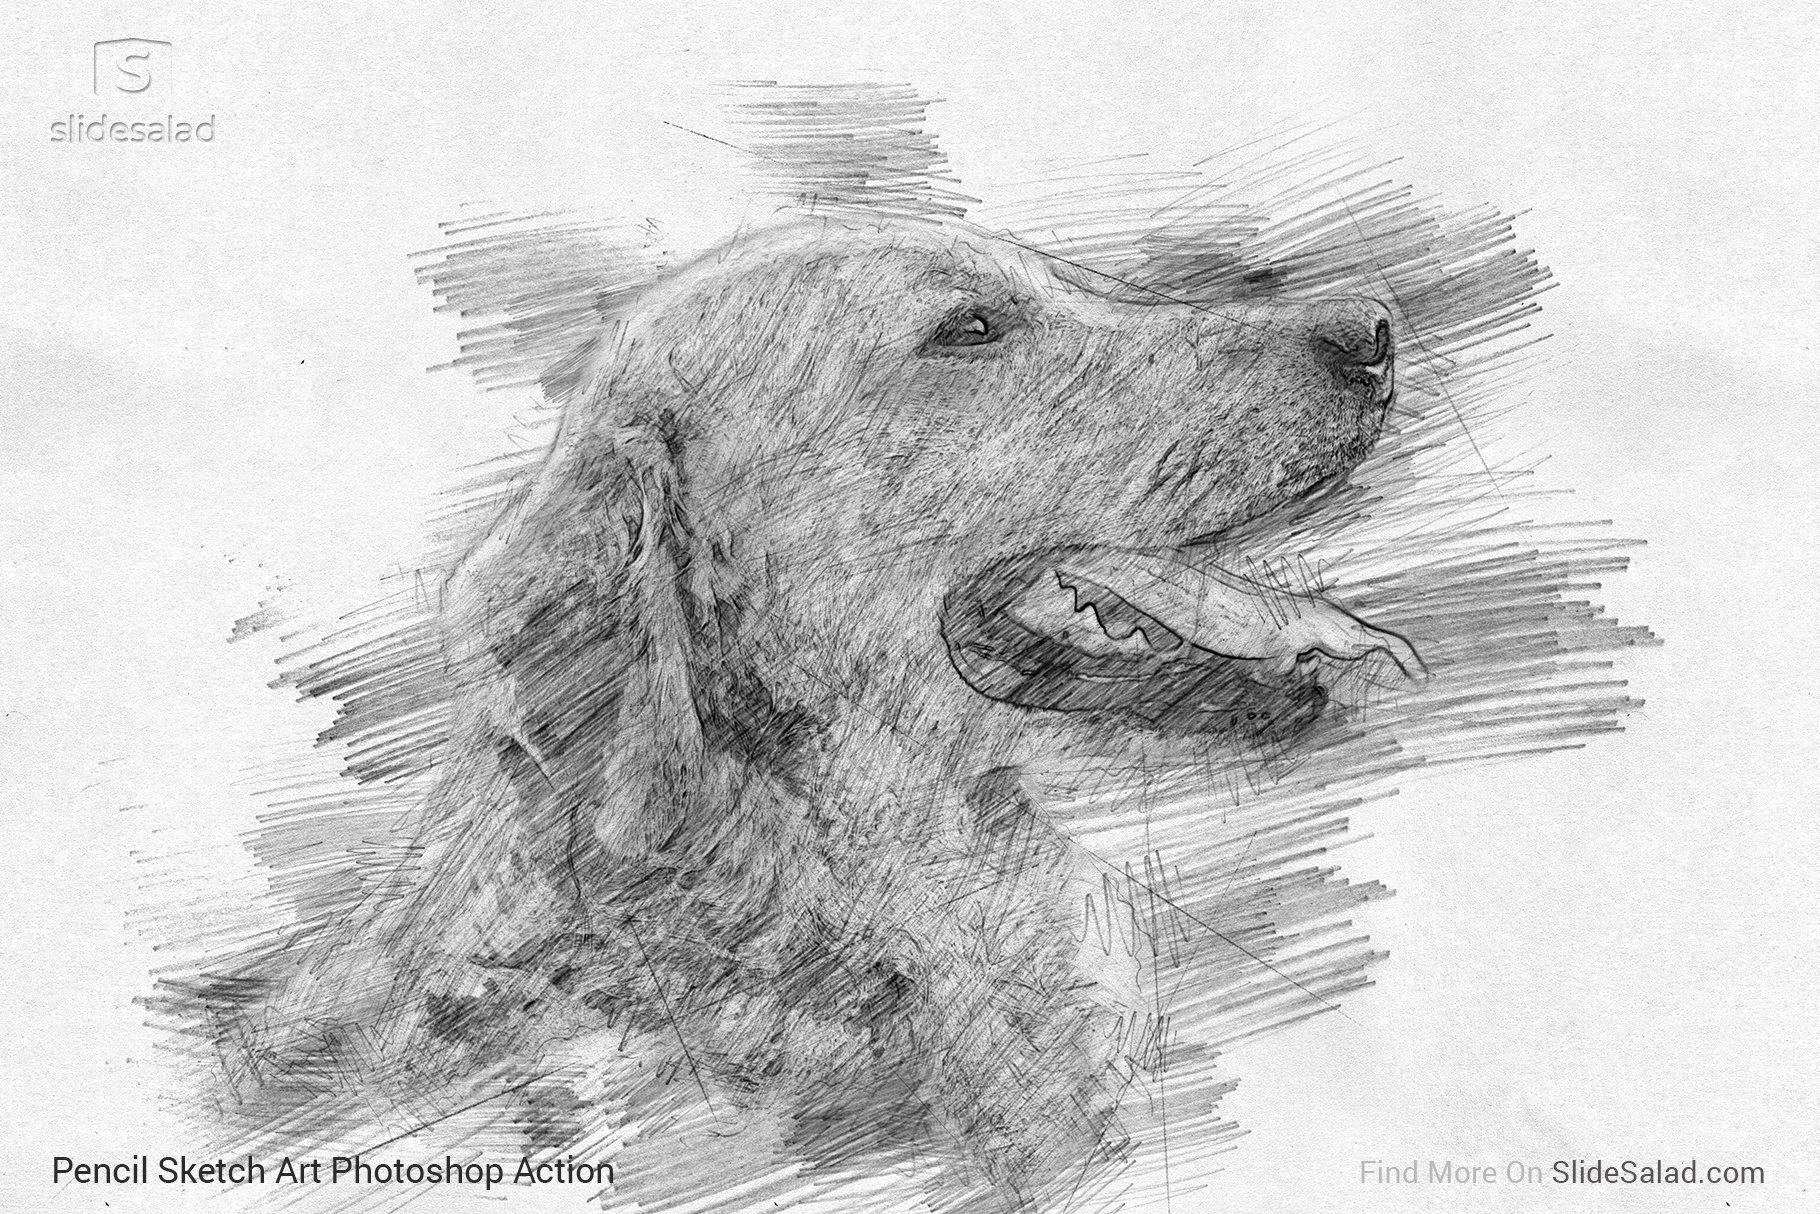 Pencil Sketch Art Photoshop Action - dog drawing example.